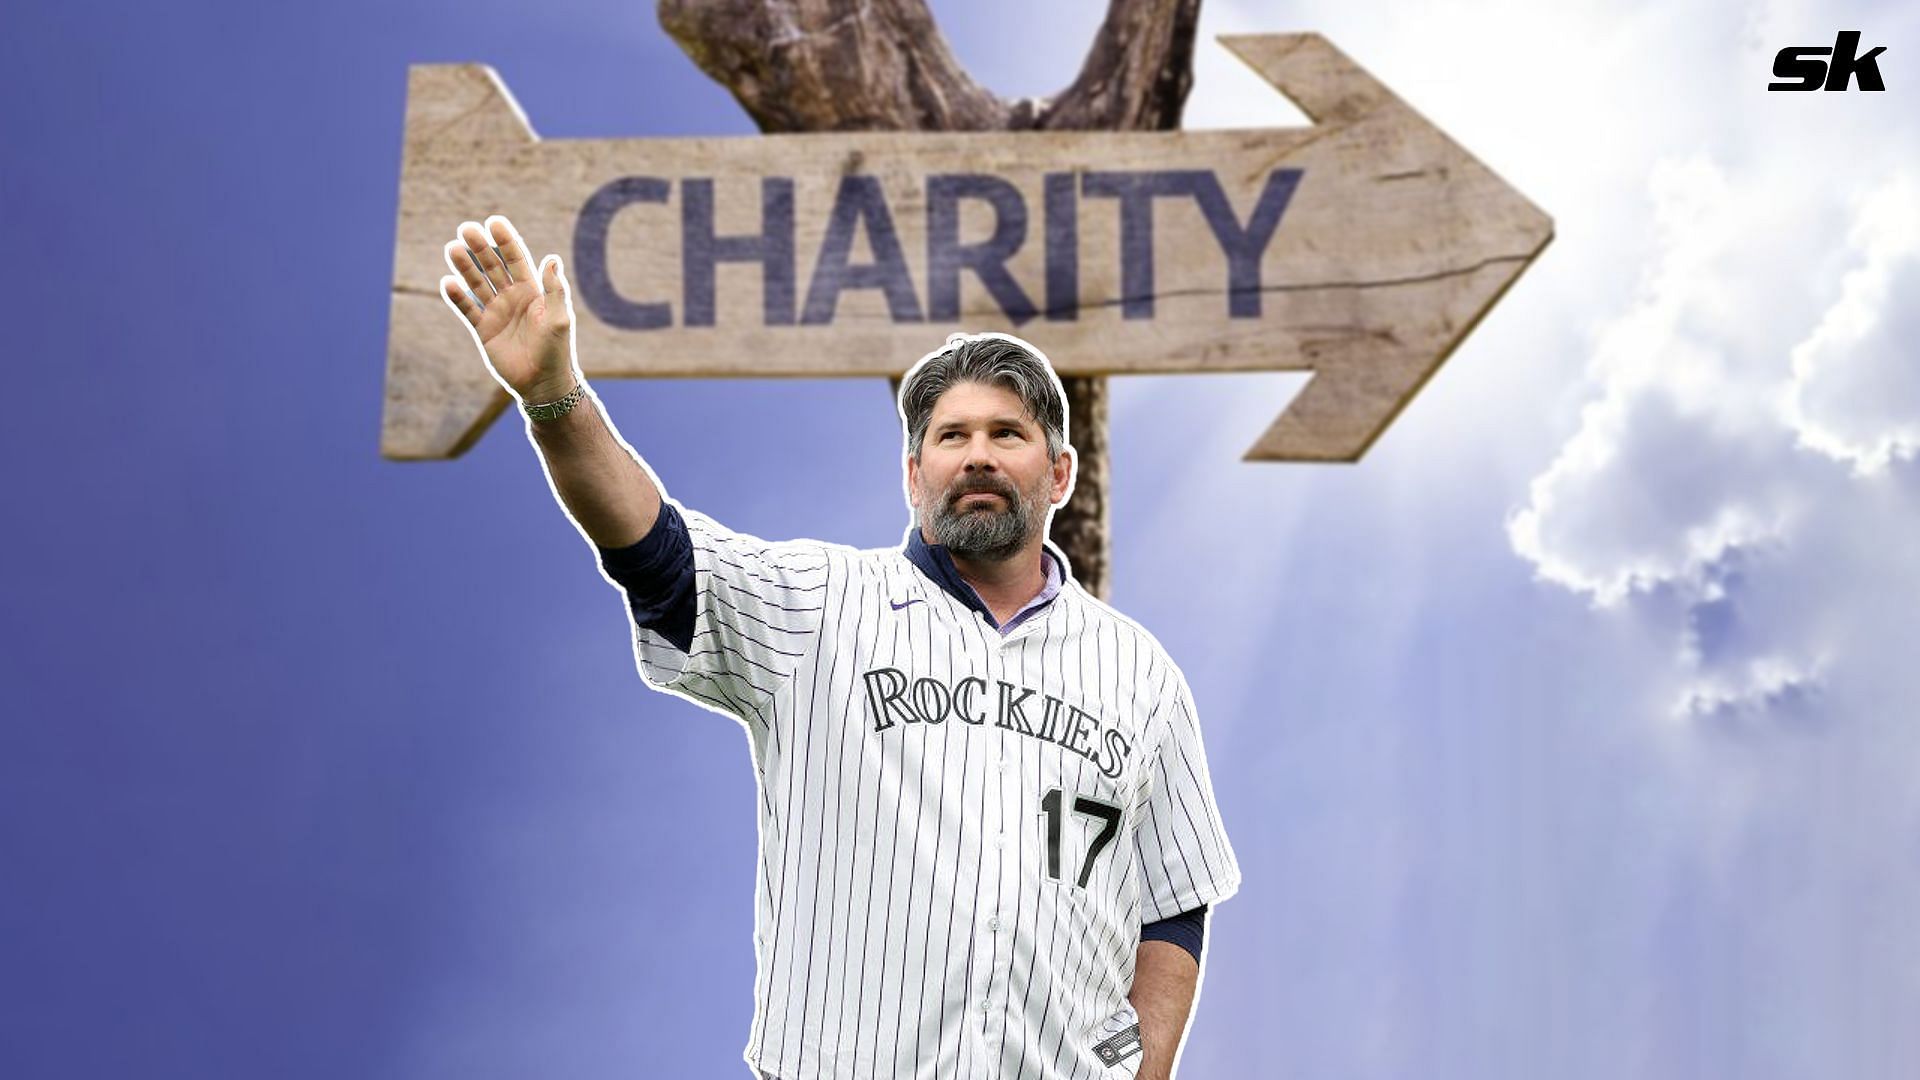 Todd Helton teams up with charity to wipe out $10,000,000 in medical debt